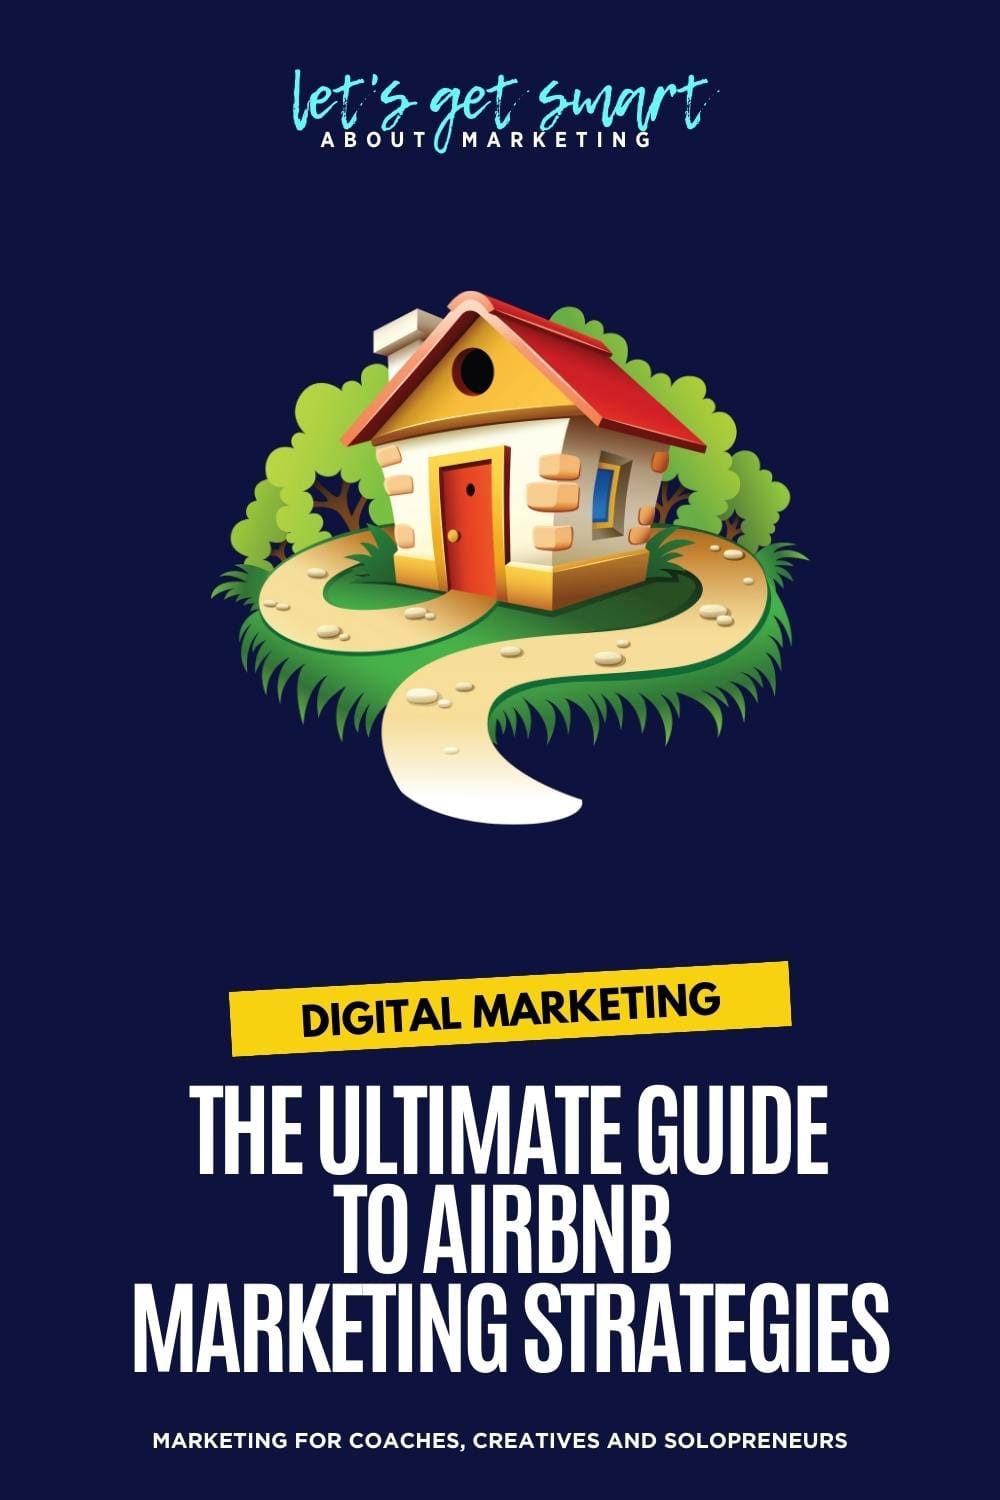 Boost Your Bookings The Ultimate Guide to Airbnb Marketing Strategies